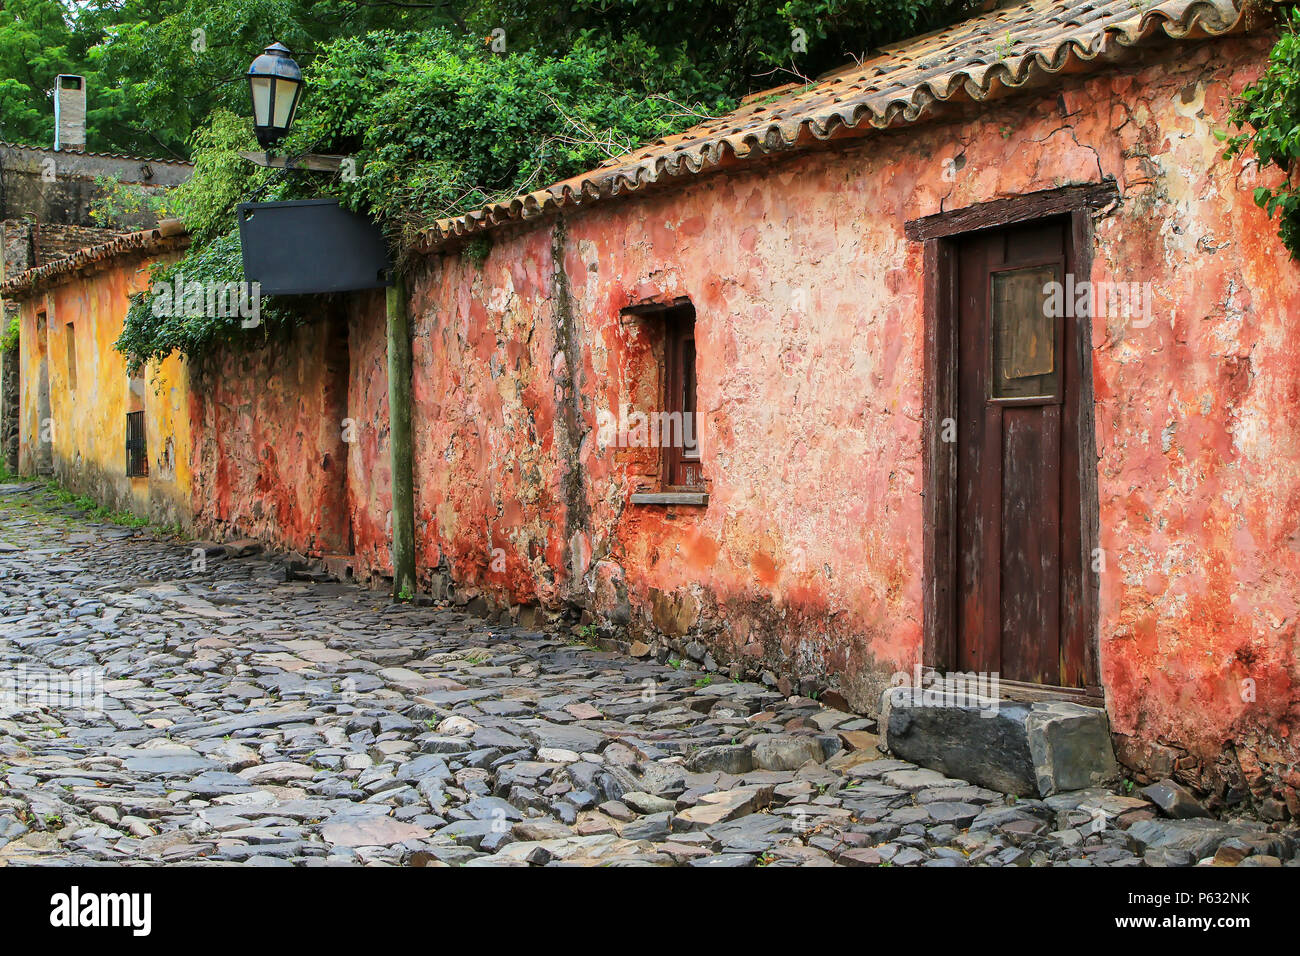 Calle de los Suspiros (Street of Sighs) in Colonia del Sacramento, Uruguay. It is one of the oldest towns in Uruguay Stock Photo